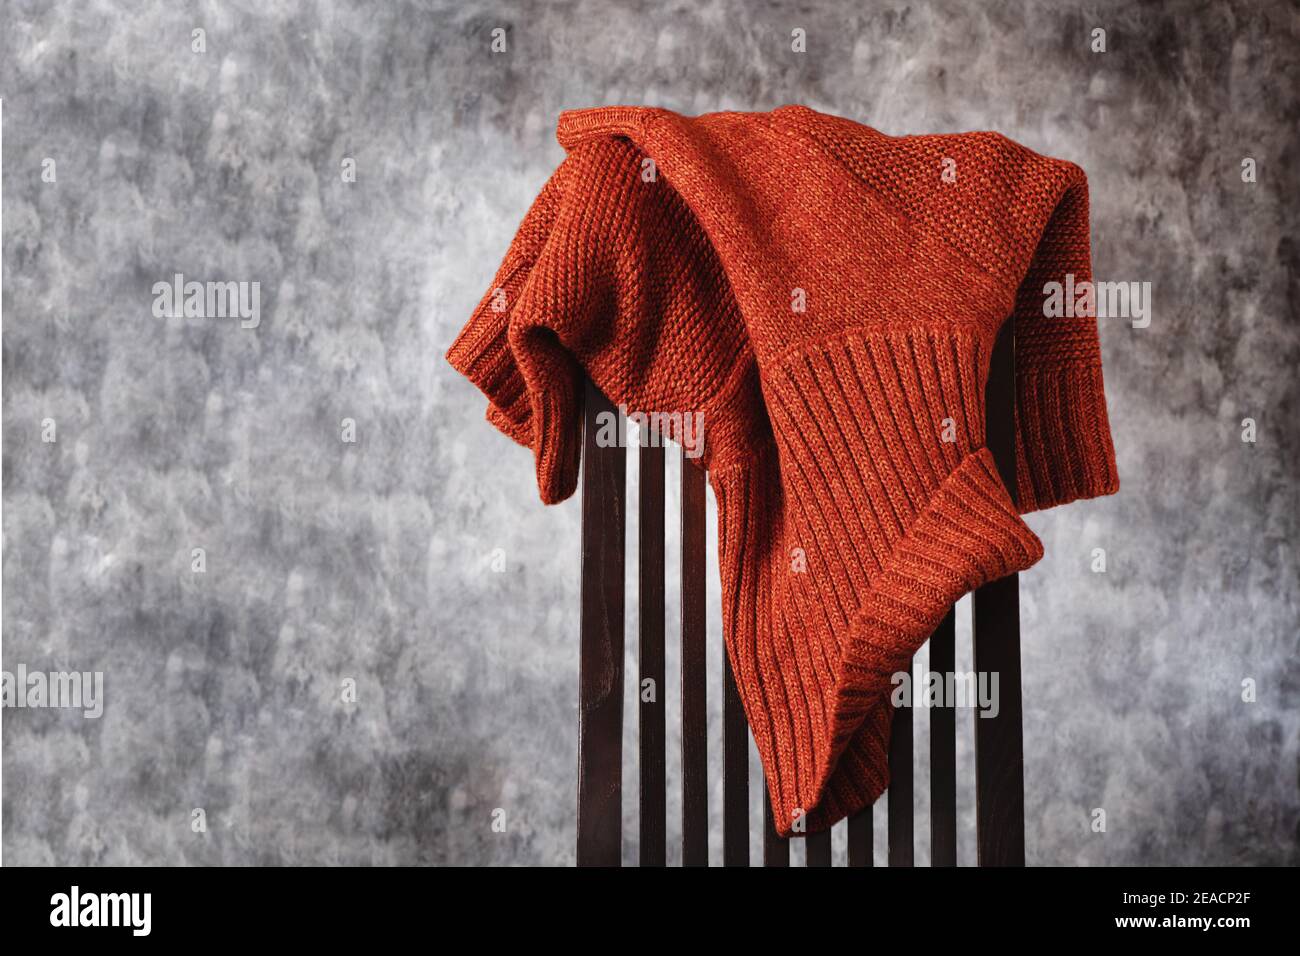 Women's wool knitted terracotta sweater casually thrown over the back of wooden chair against gray wall. Minimal style. Copy space Stock Photo